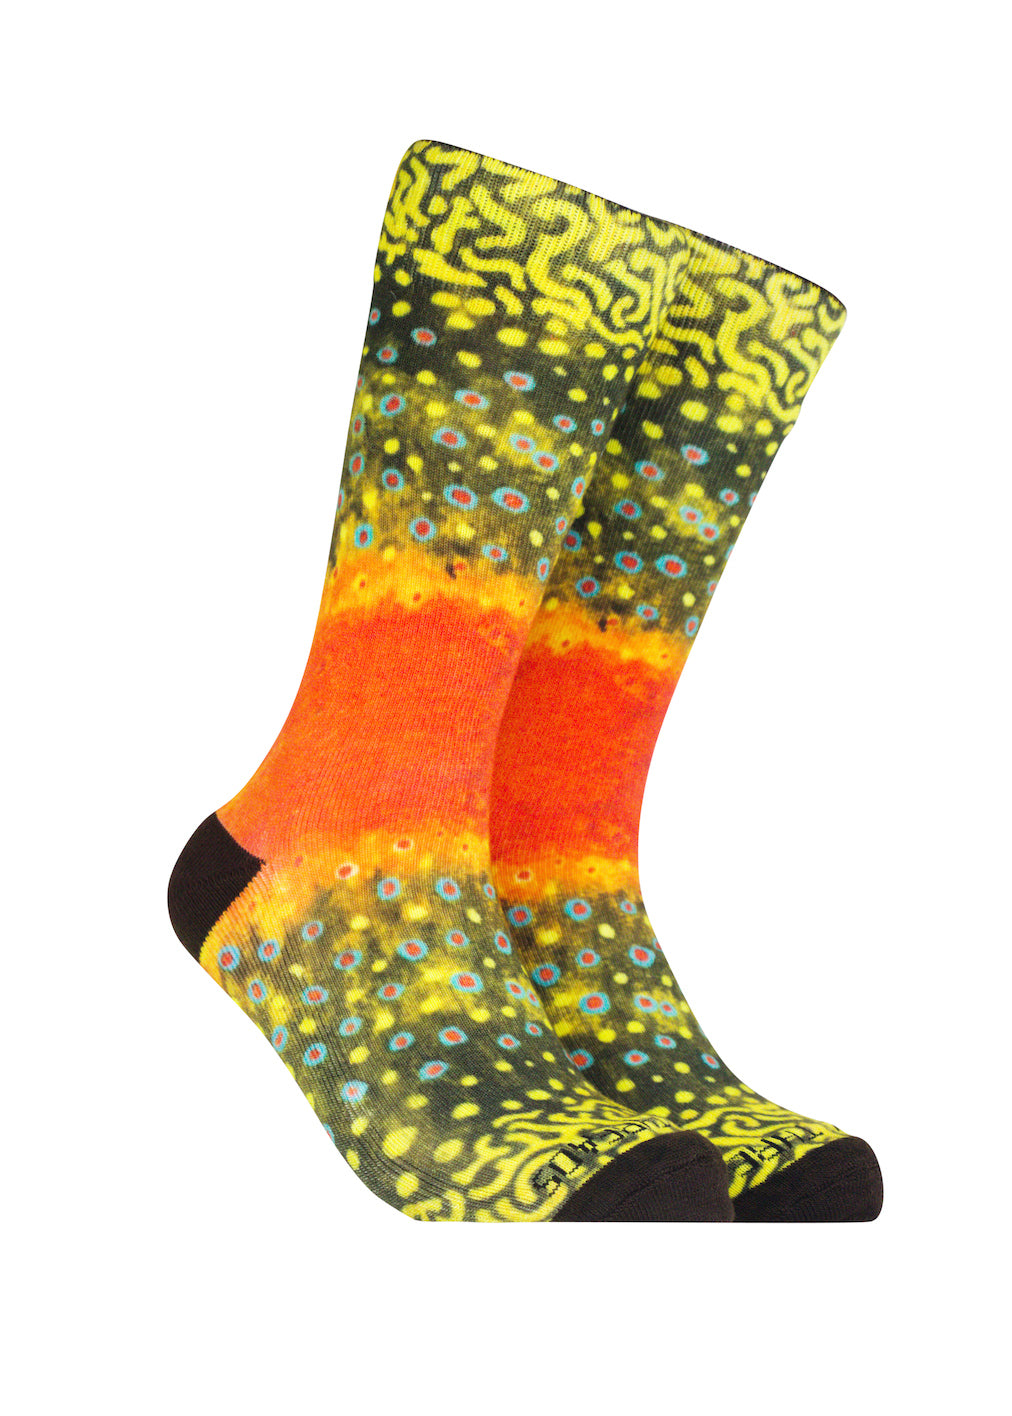 Brook Trout Socks - Fish Patterned Clothing- Gifts for Anglers – Reel  Threads